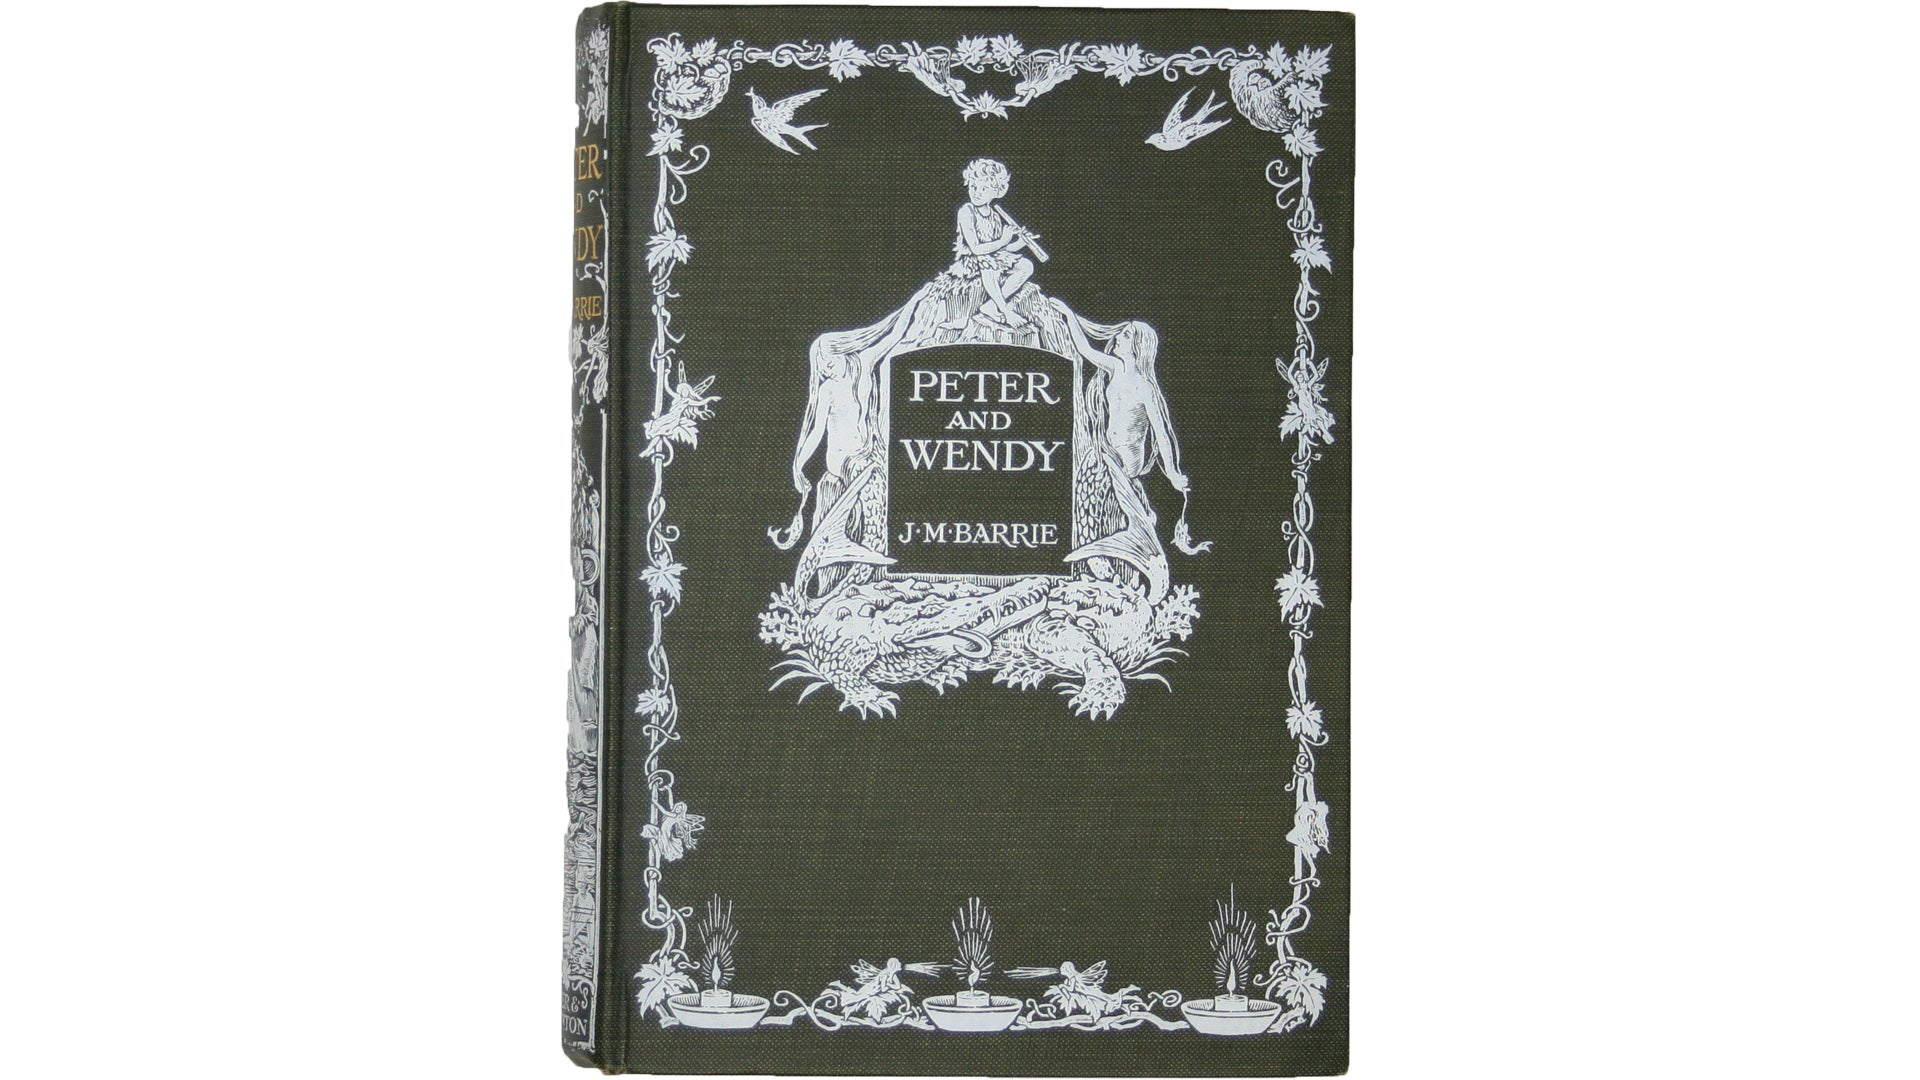 Peter & Wendy: First Edition in Dustwrapper